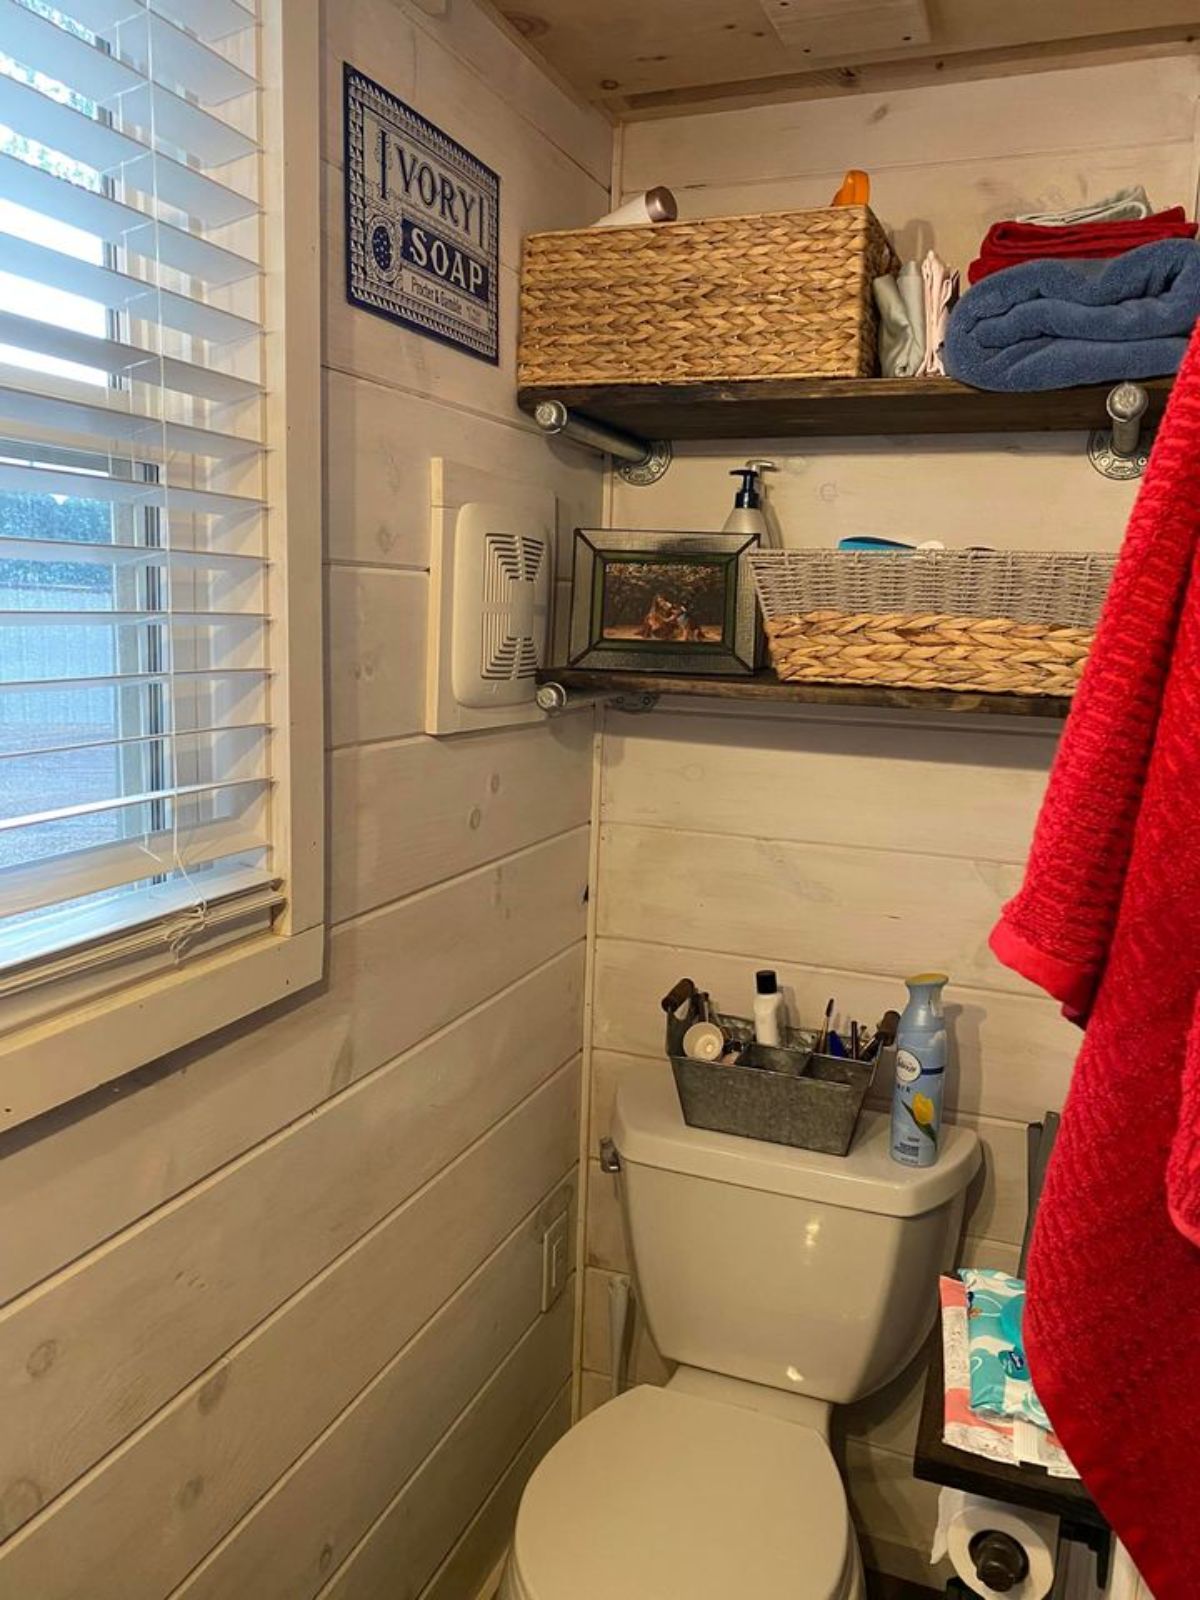 Bathroom of 198 sf Tiny Cottage has a standard toilet, shower area and open shelves for all the toiletries